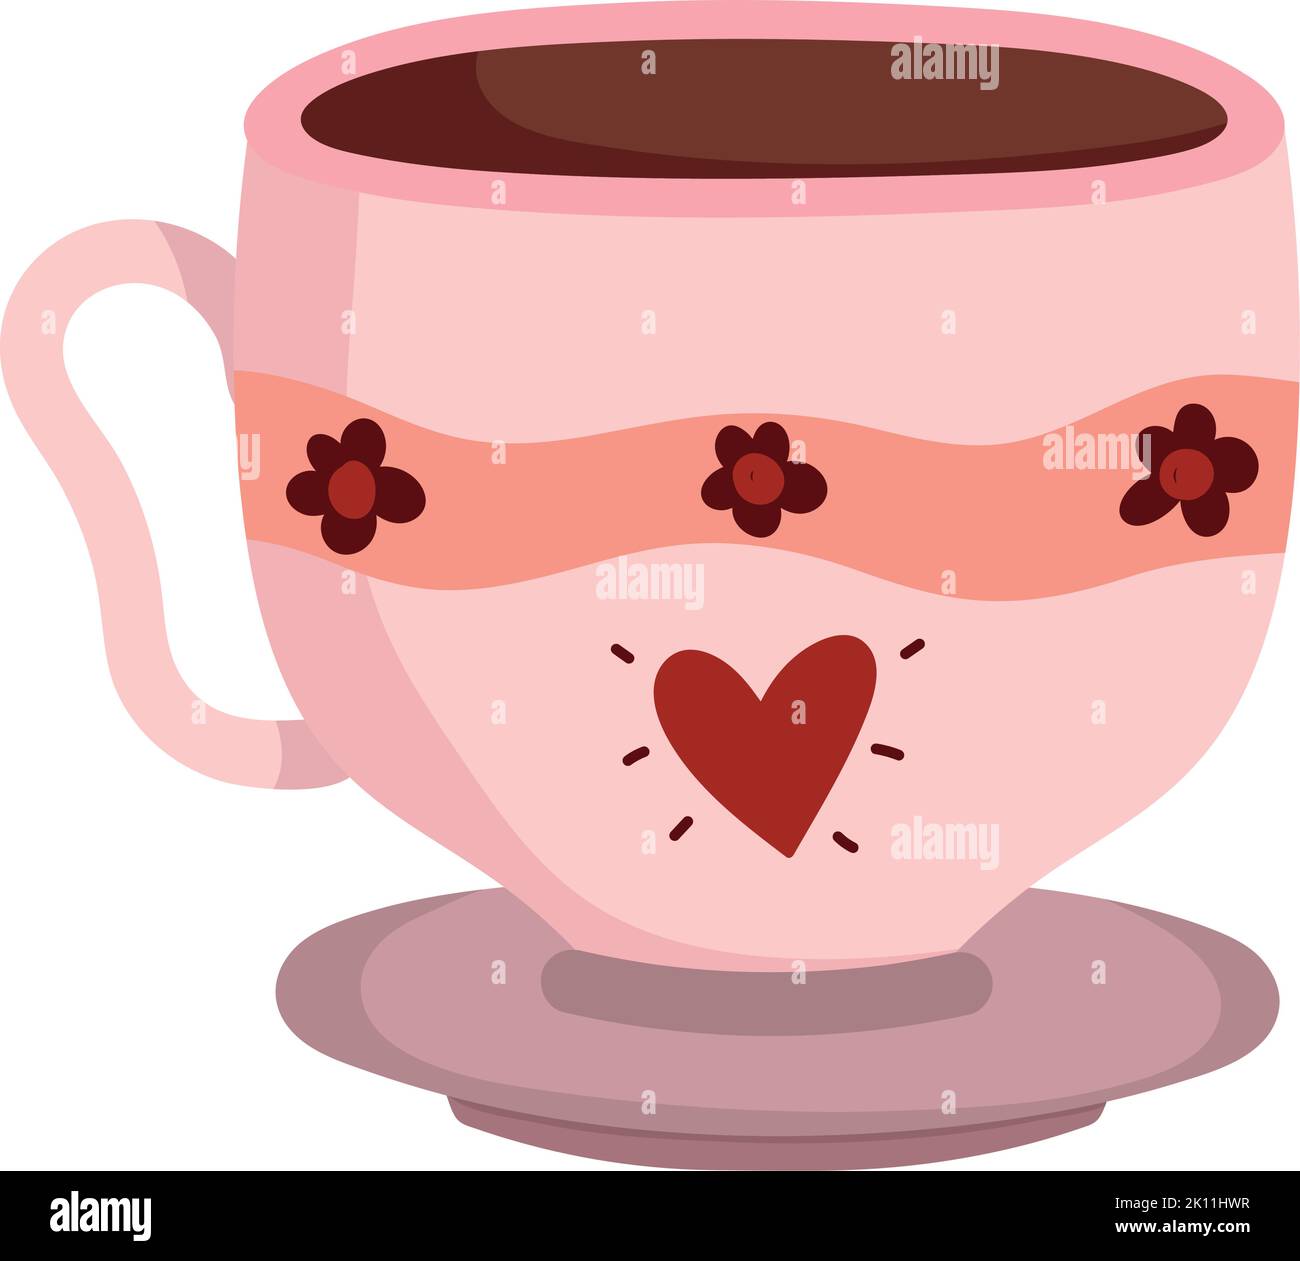 ceramic cup and dish Stock Vector